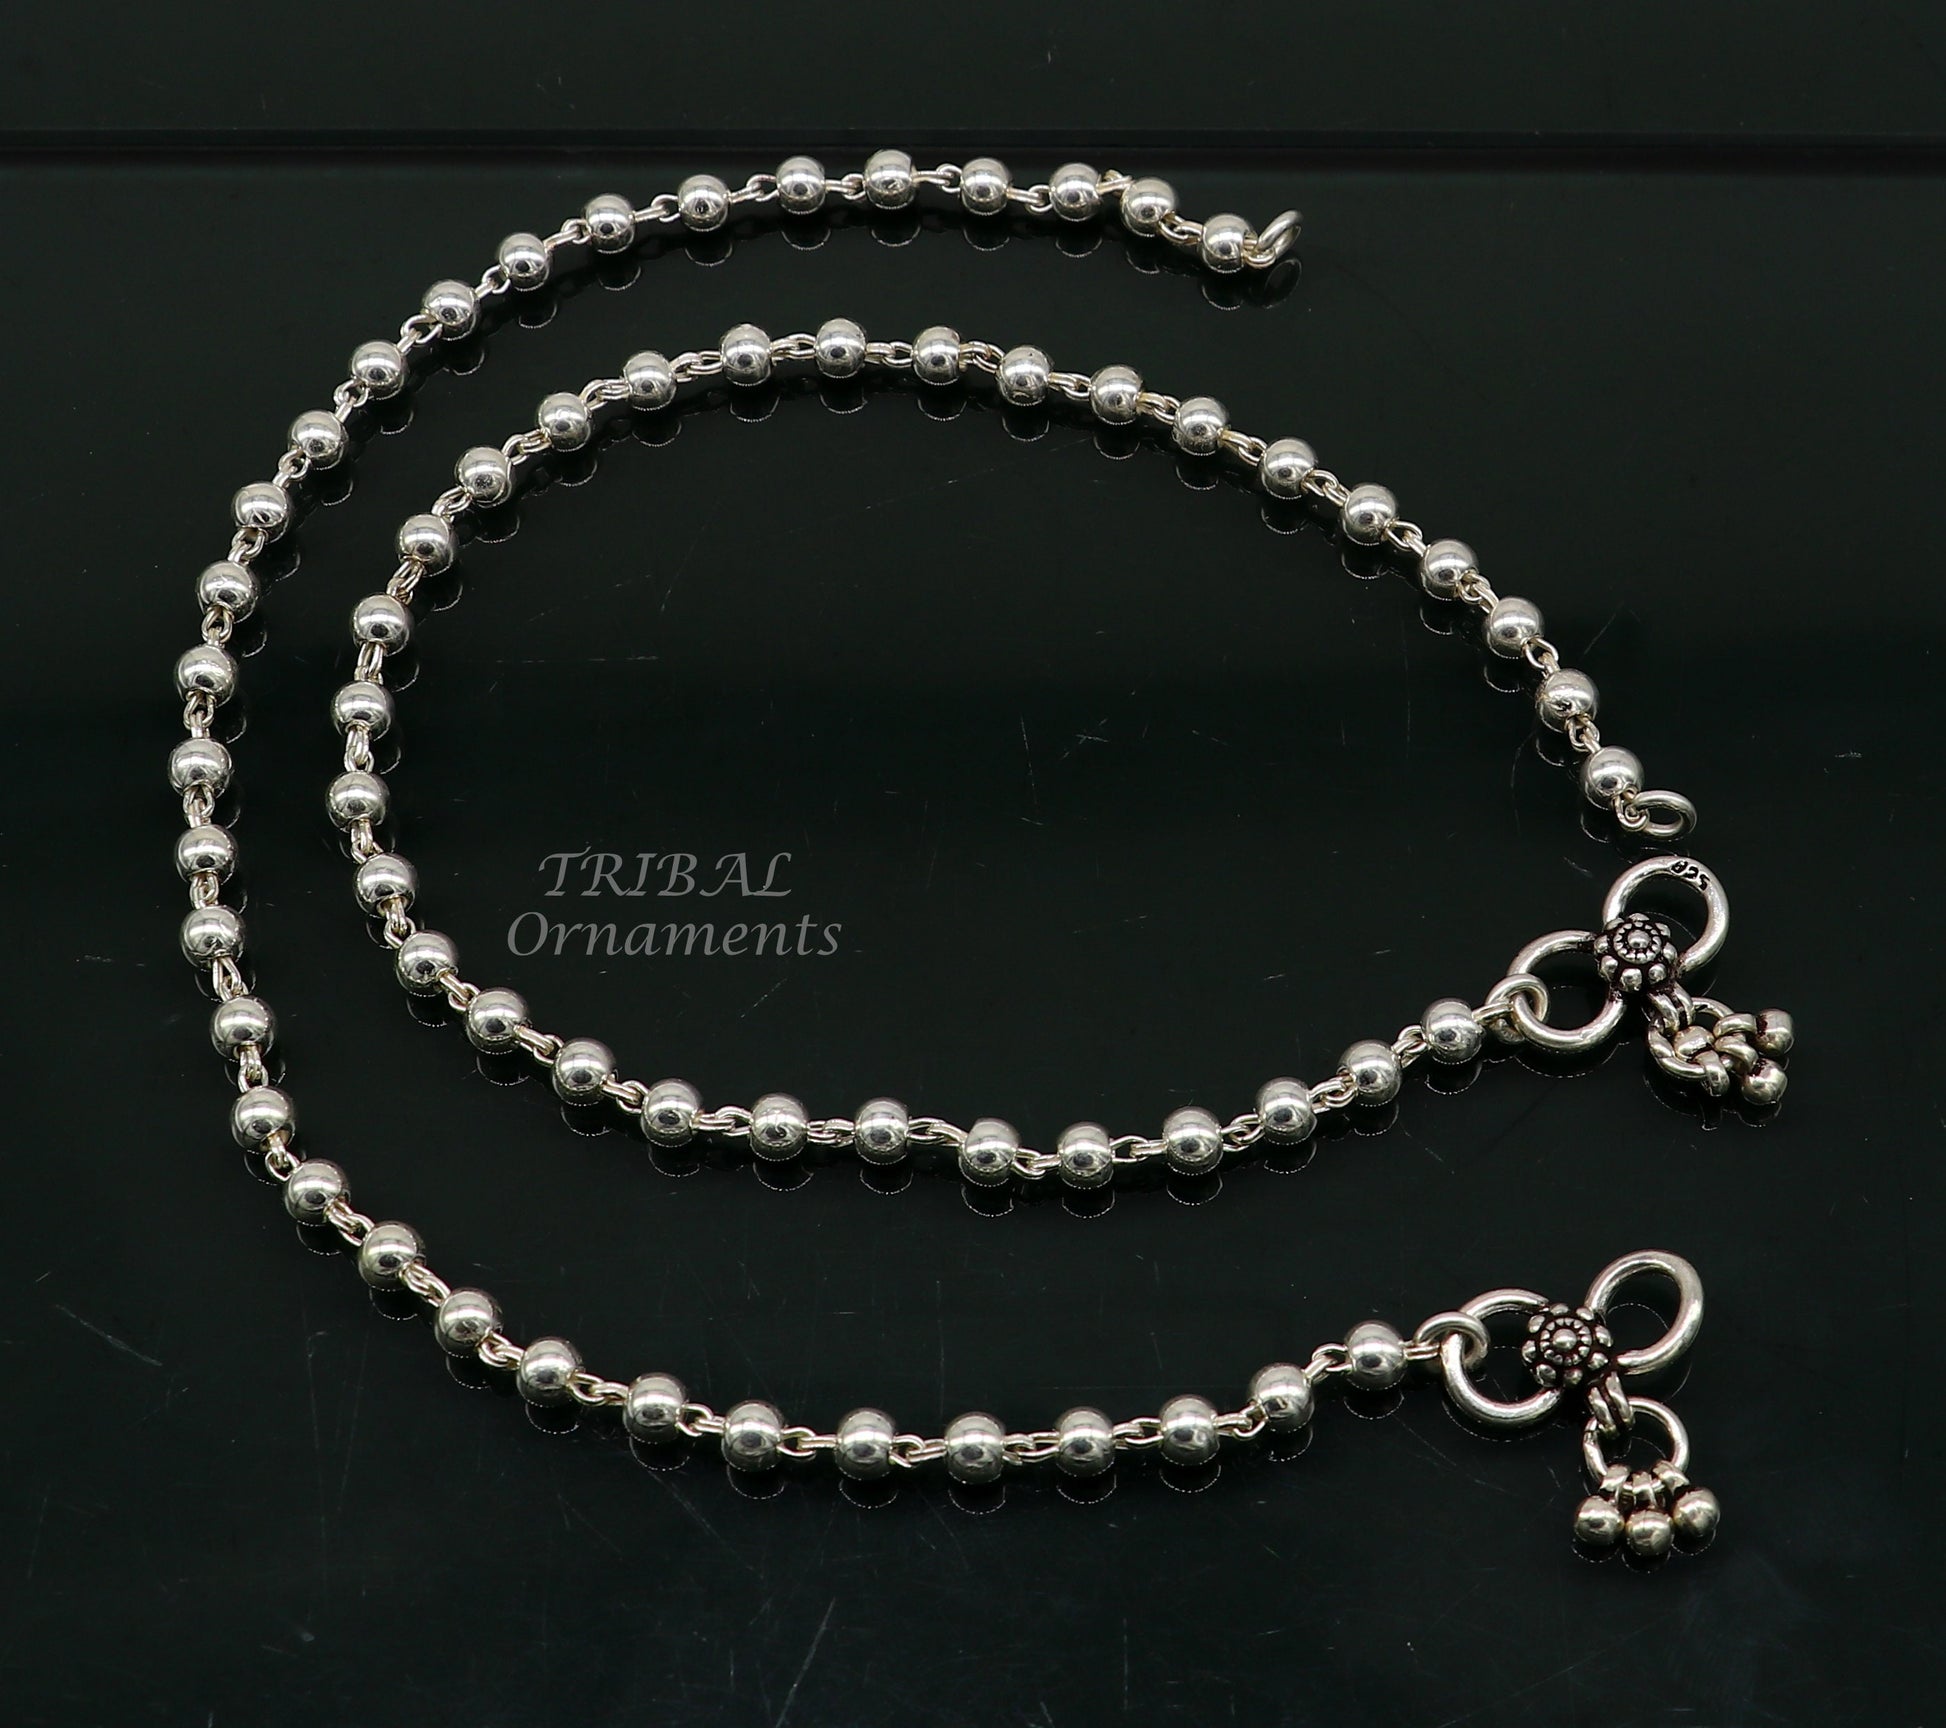 4.5mm 9"to 12" 925 sterling silver beaded/ball chain anklet bracelet amazing light weight delicate anklets belly dance silver jewelry ank537 - TRIBAL ORNAMENTS